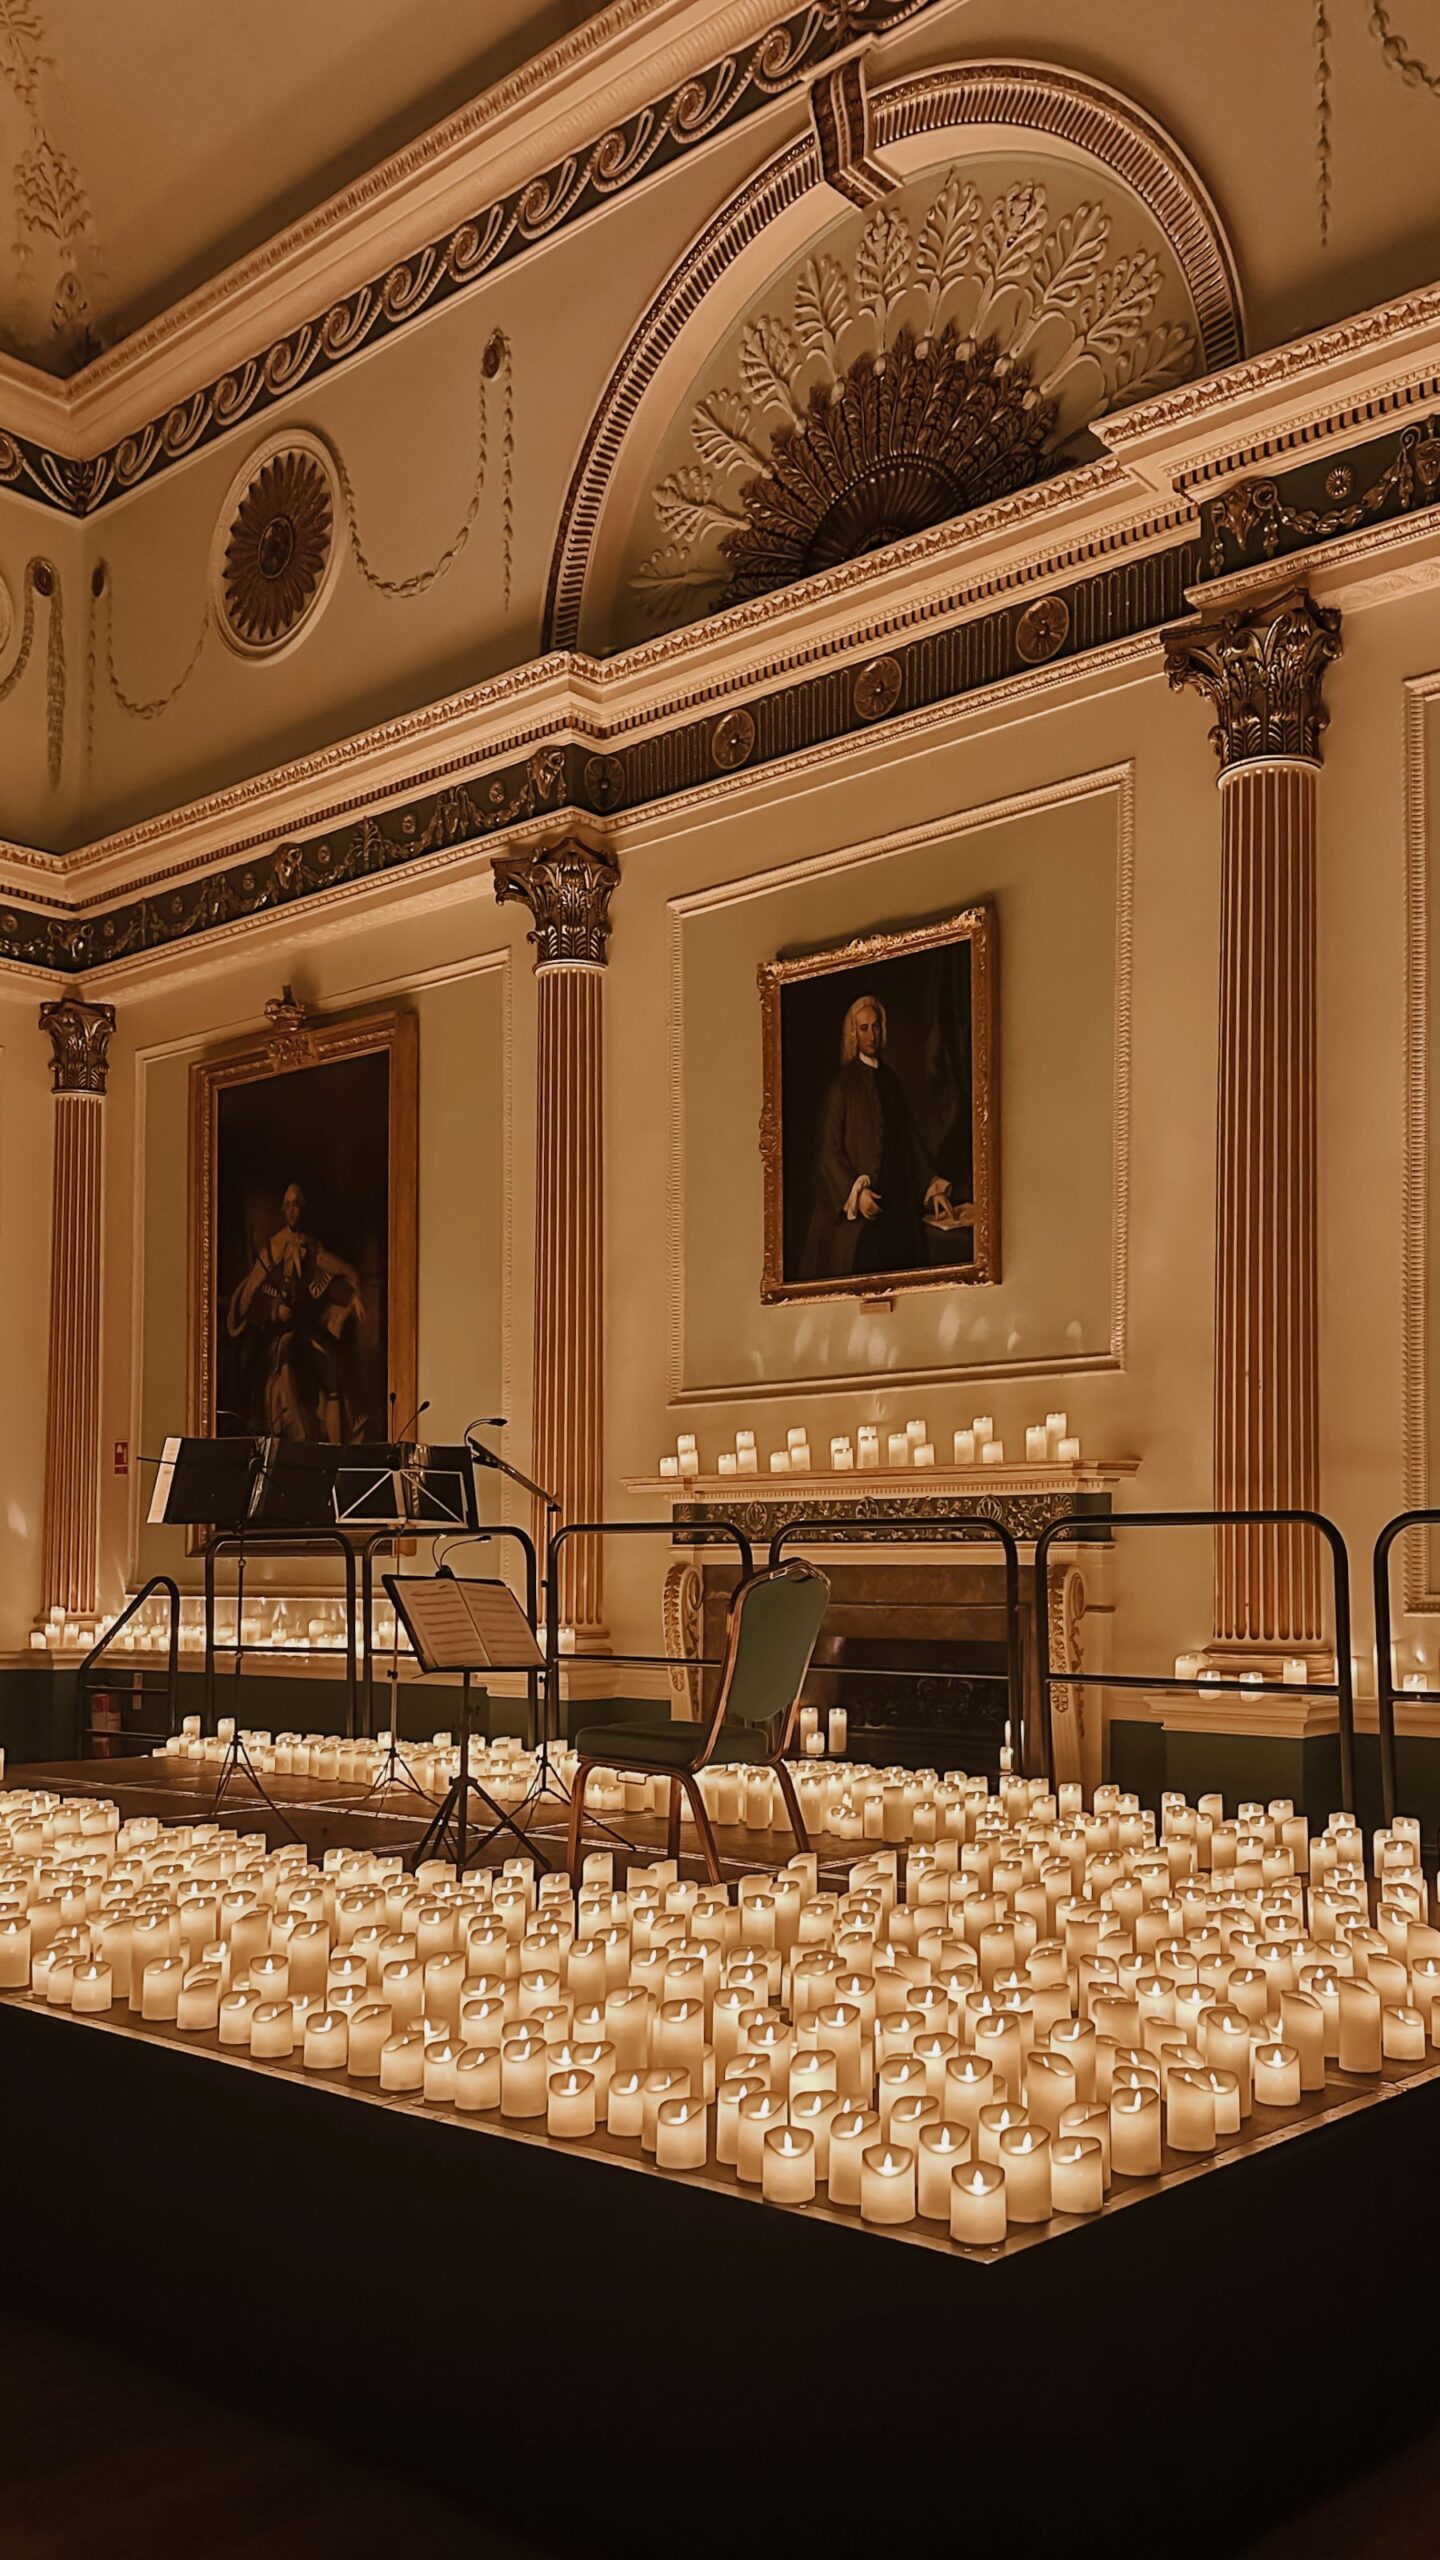 Candles in Bath Assembly Rooms for concert